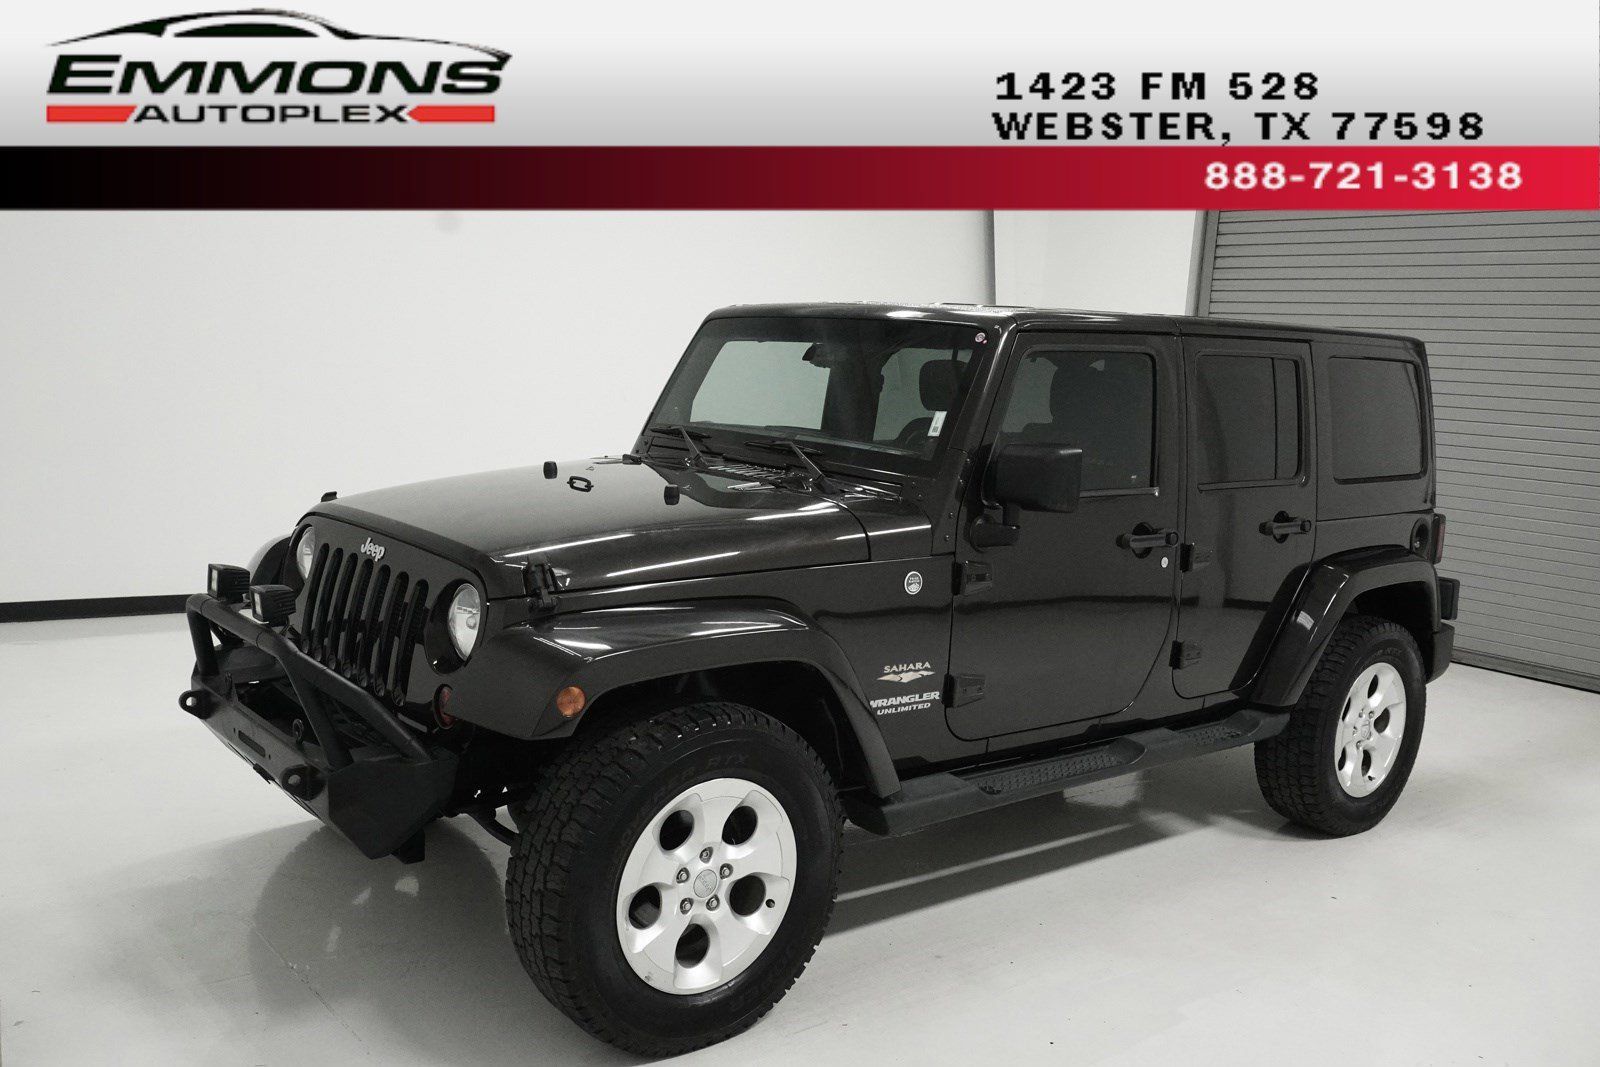 Used 2013 Jeep Wrangler Unlimited